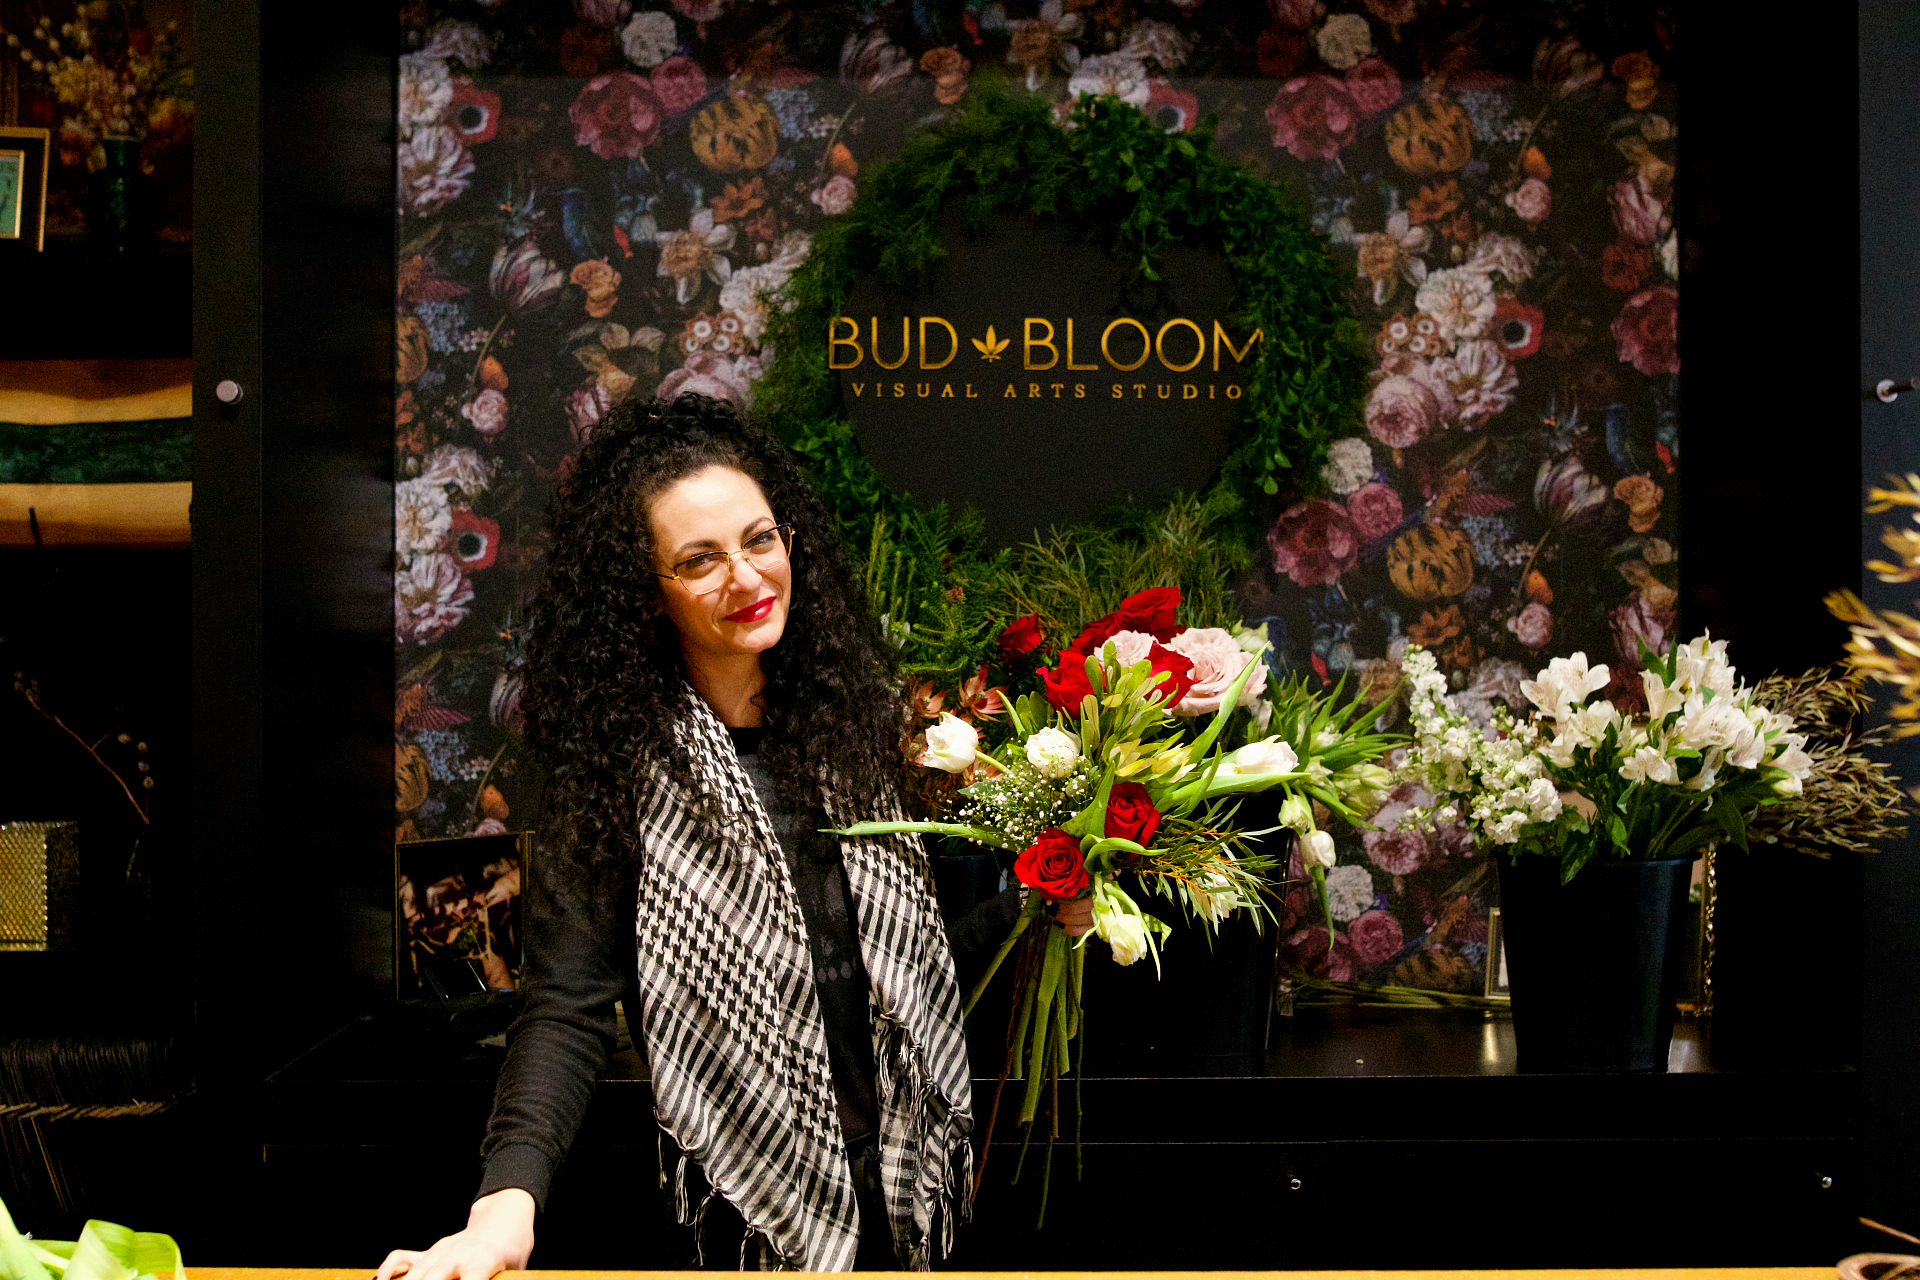 woman holding a bouquet of flowers in front of Bud and Bloom Visual Arts Studio sign